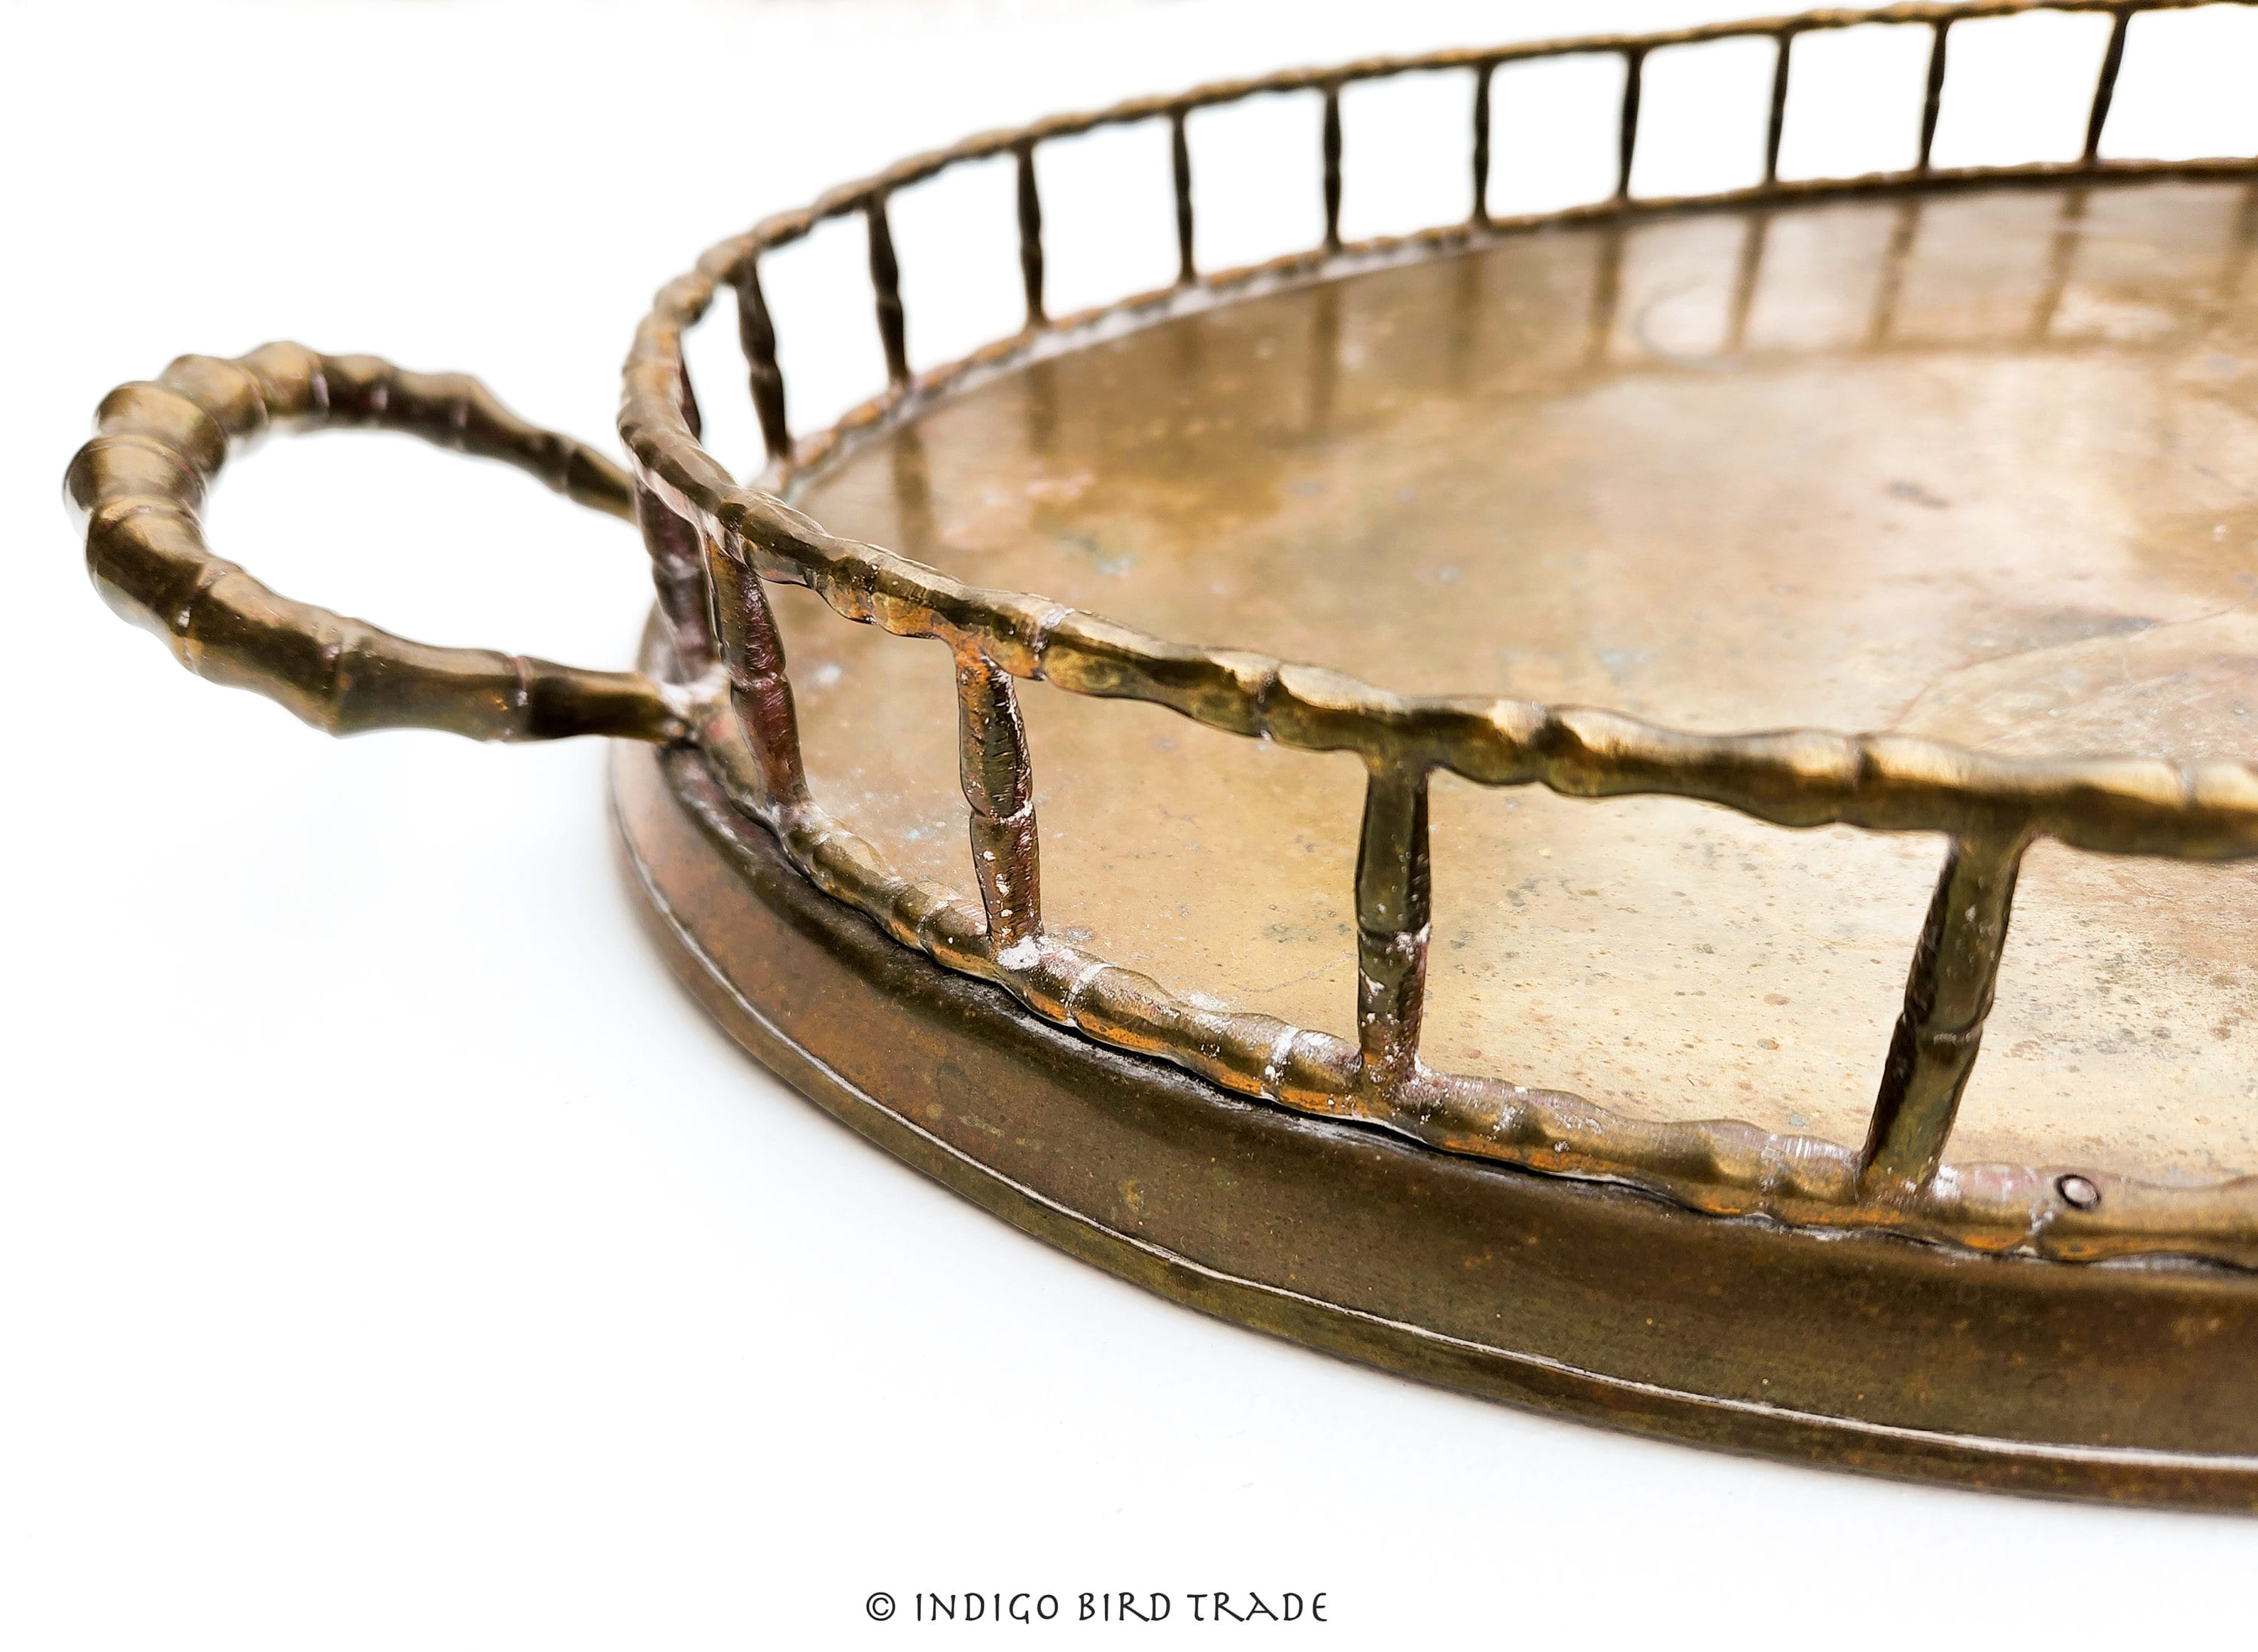 22 Large Vintage Brass Bamboo Tray With Handles Antique Oval Display Tray  Ornate Gold Metal Vanity Mid Century Gallery Serving Tray MCM 